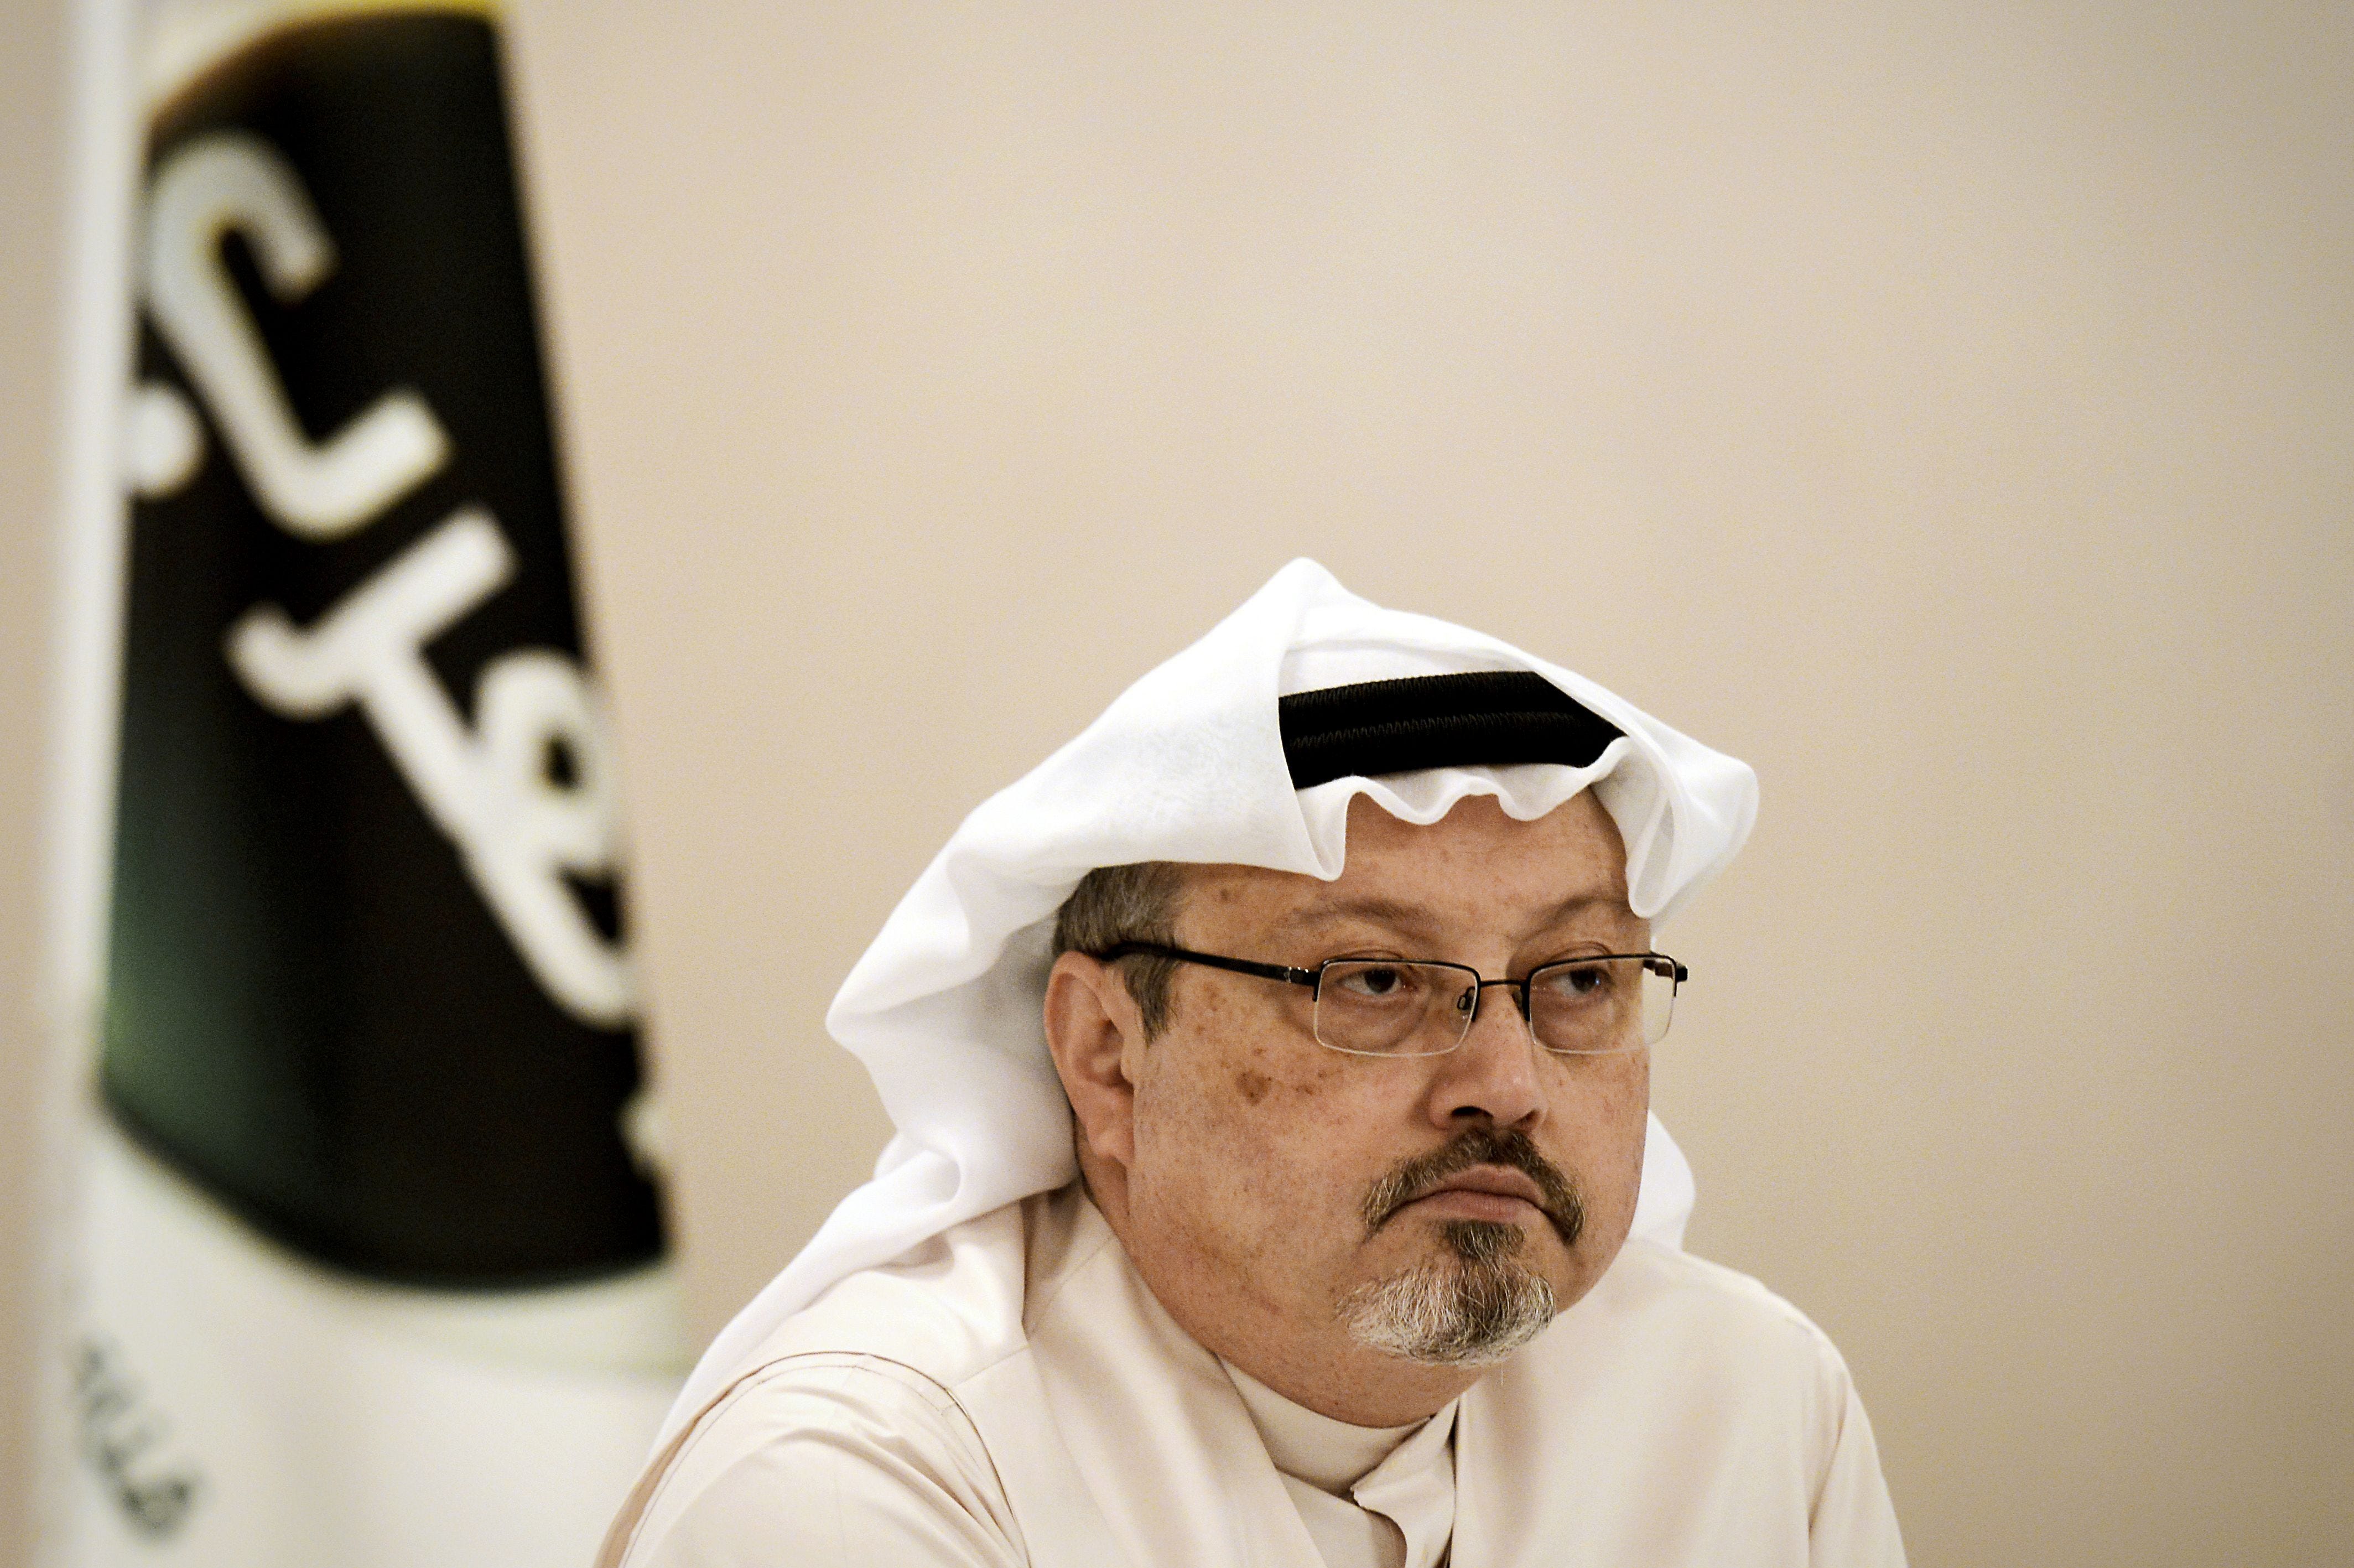 Trump says he&apos;s taking &apos;a lot of things into consideration&apos; on Khashoggi&apos;s killing. What could the US do next?